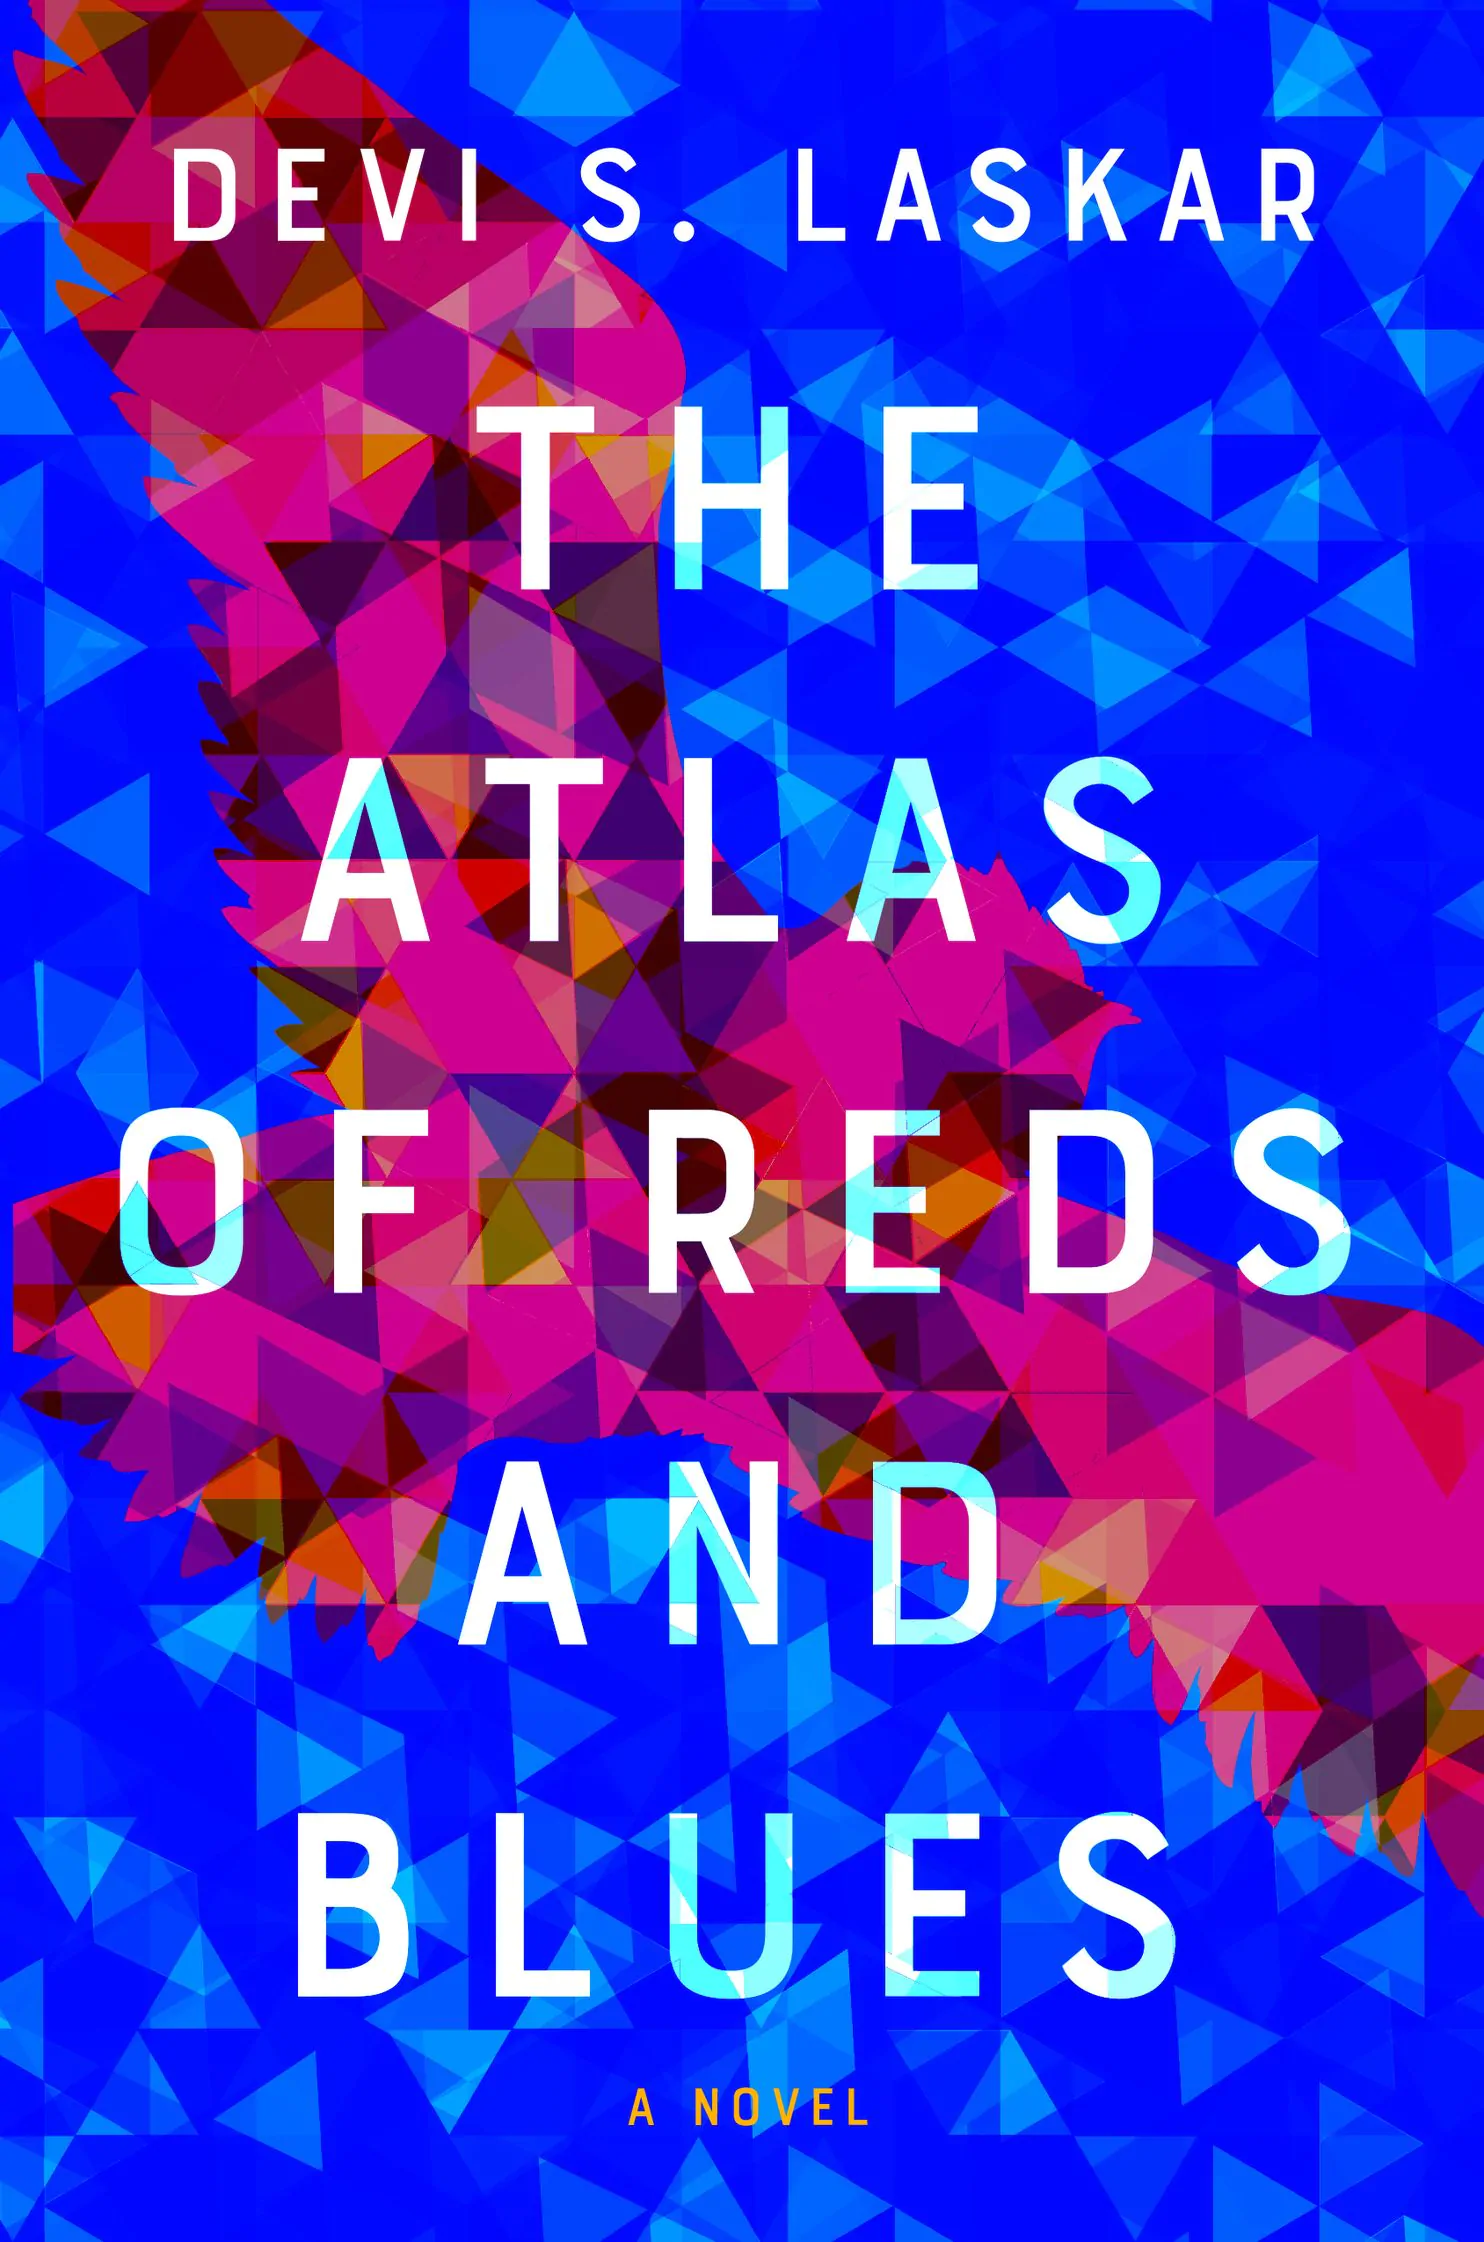 The Atlas of Reds and Blues by Devi S Laskar